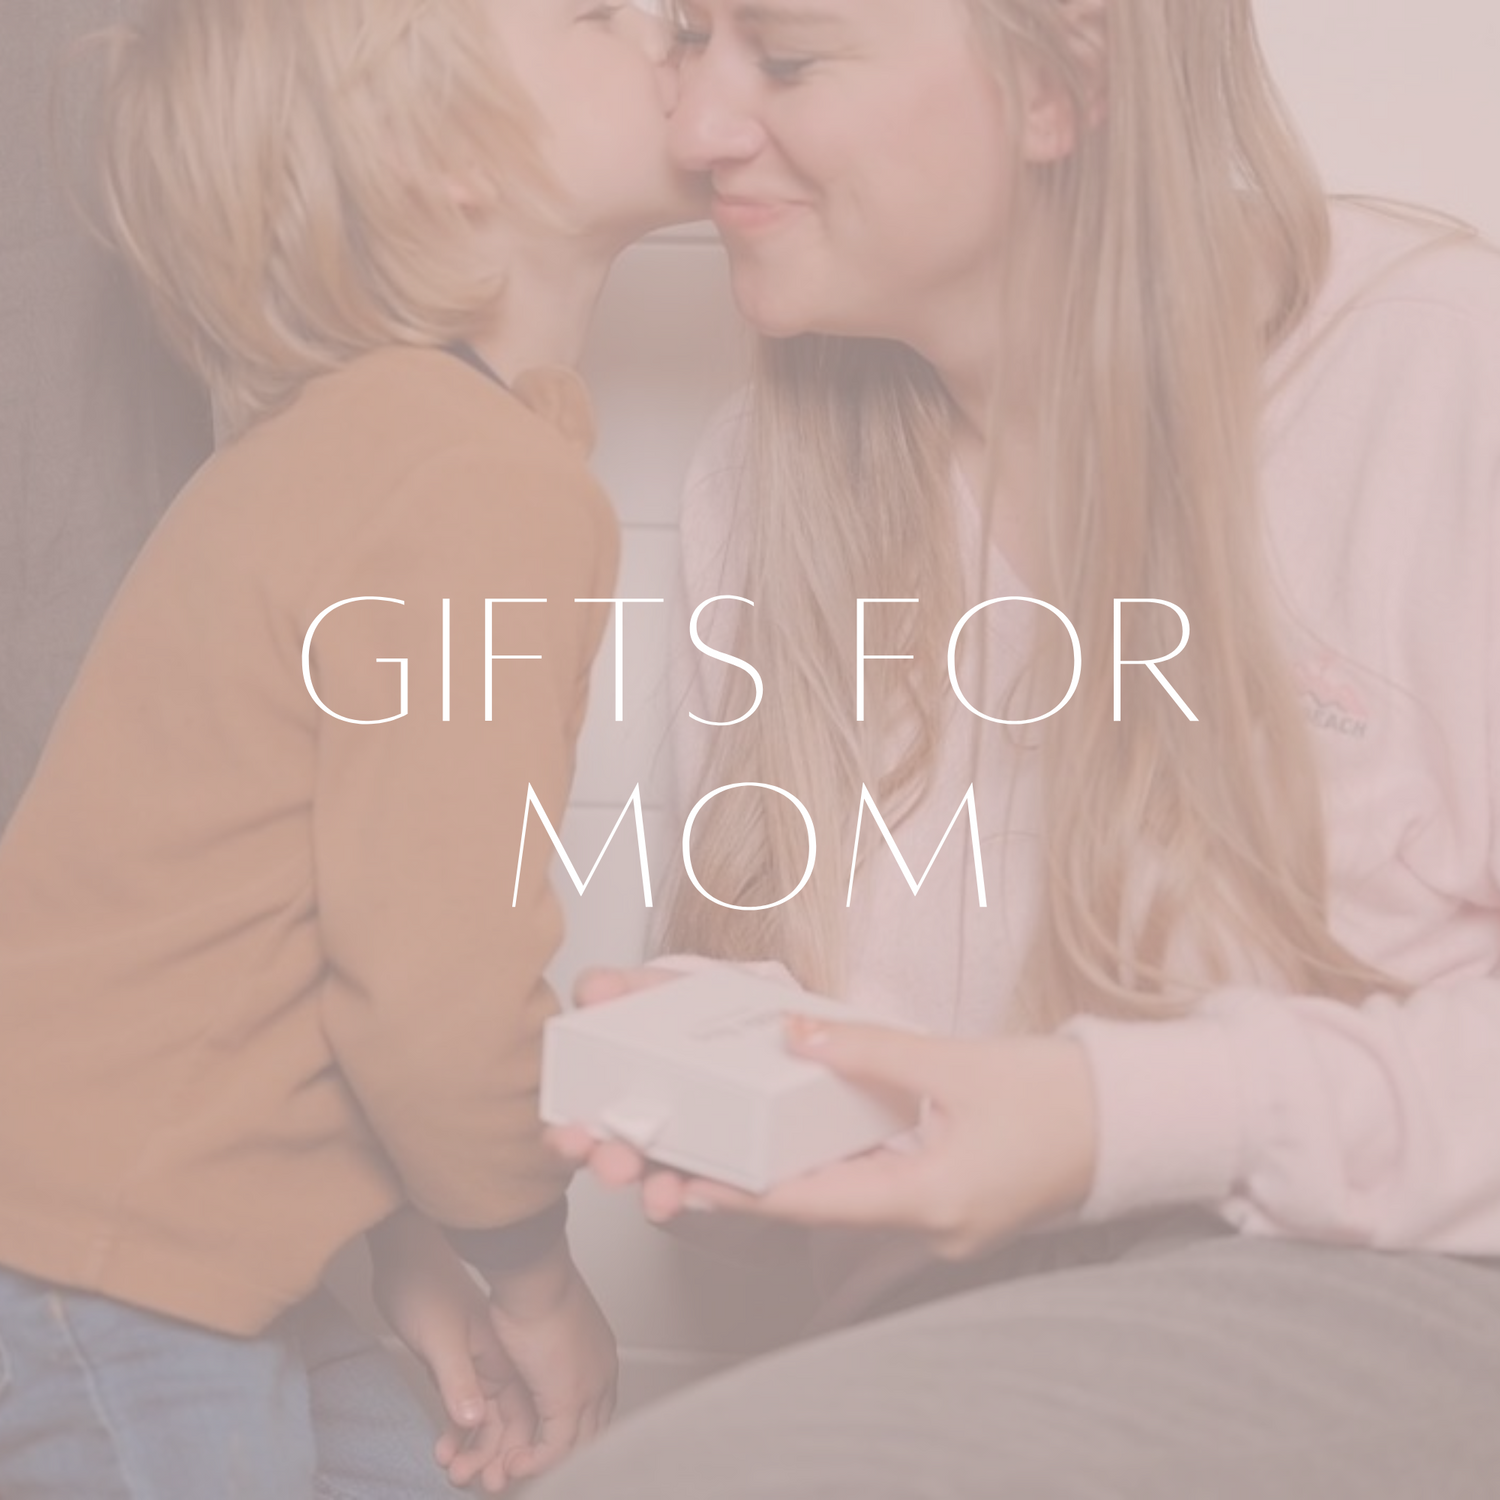 Gifts for Mothers